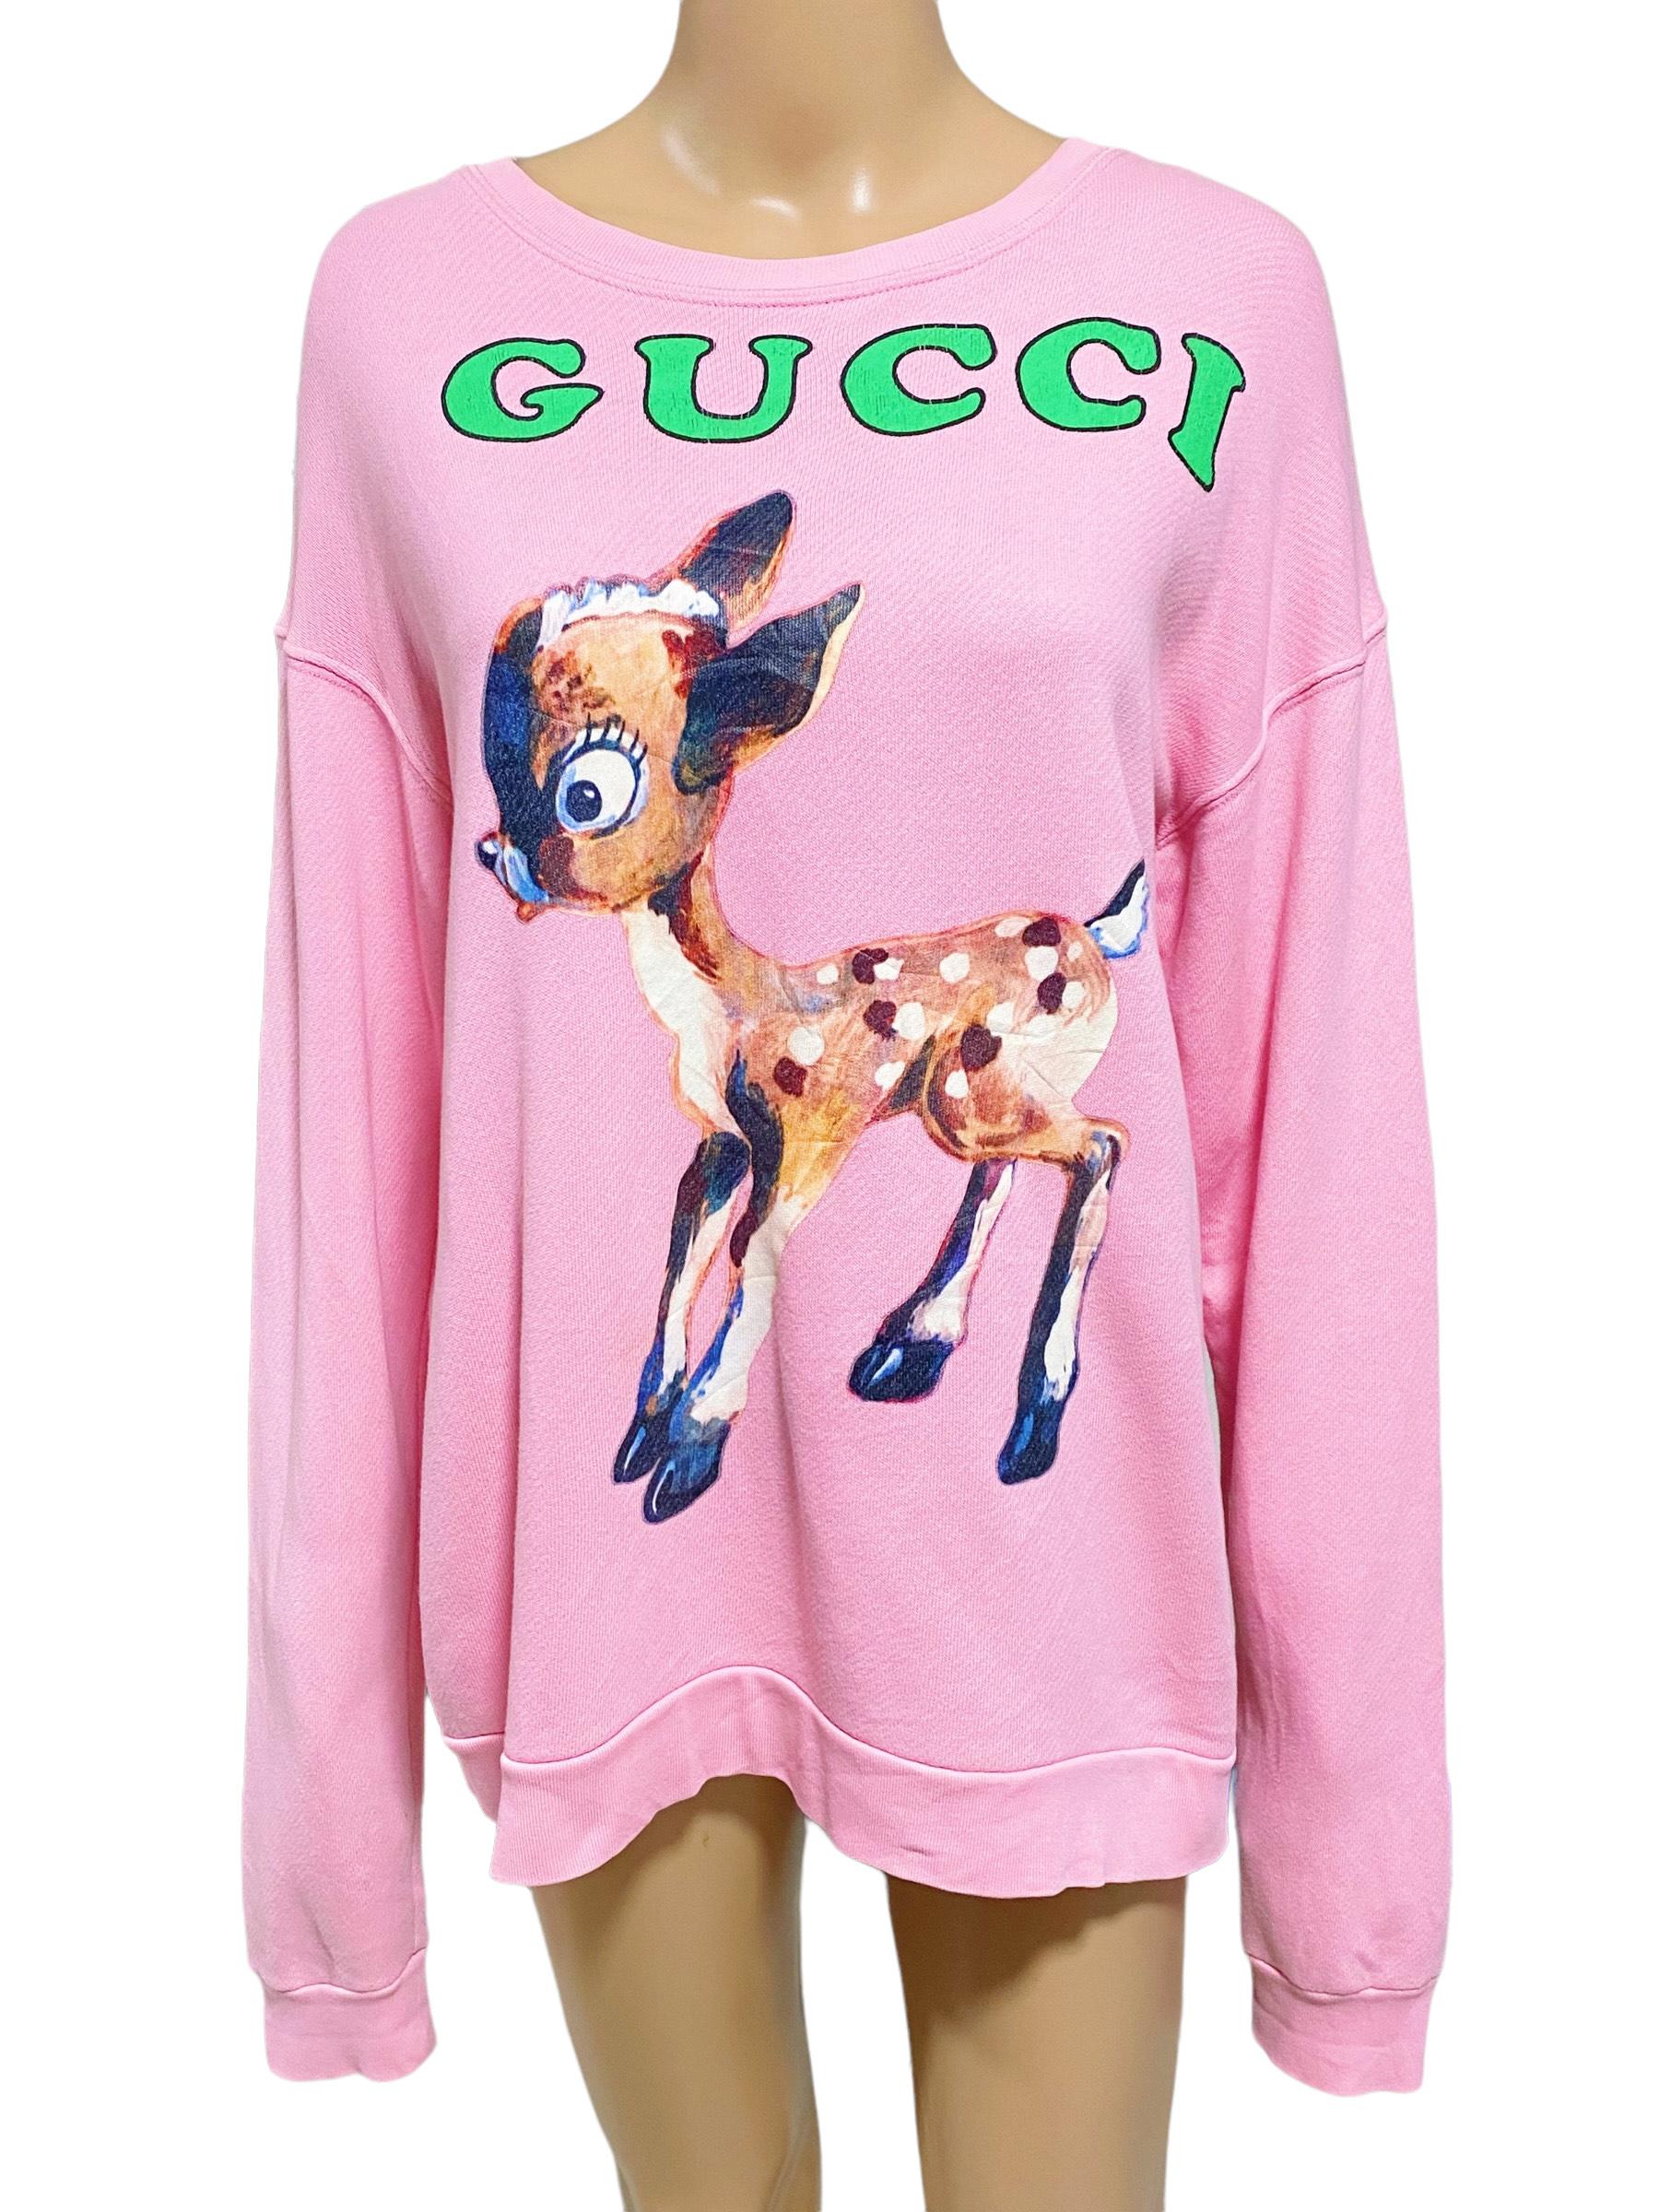 Special edition collectible item! The Gucci logo and a fawn are printed on the front of this oversized
sweatshirt. The ladybug and flower print is a subtly humorous addition that connects to the House story. Color is light pink, a thick jersey made